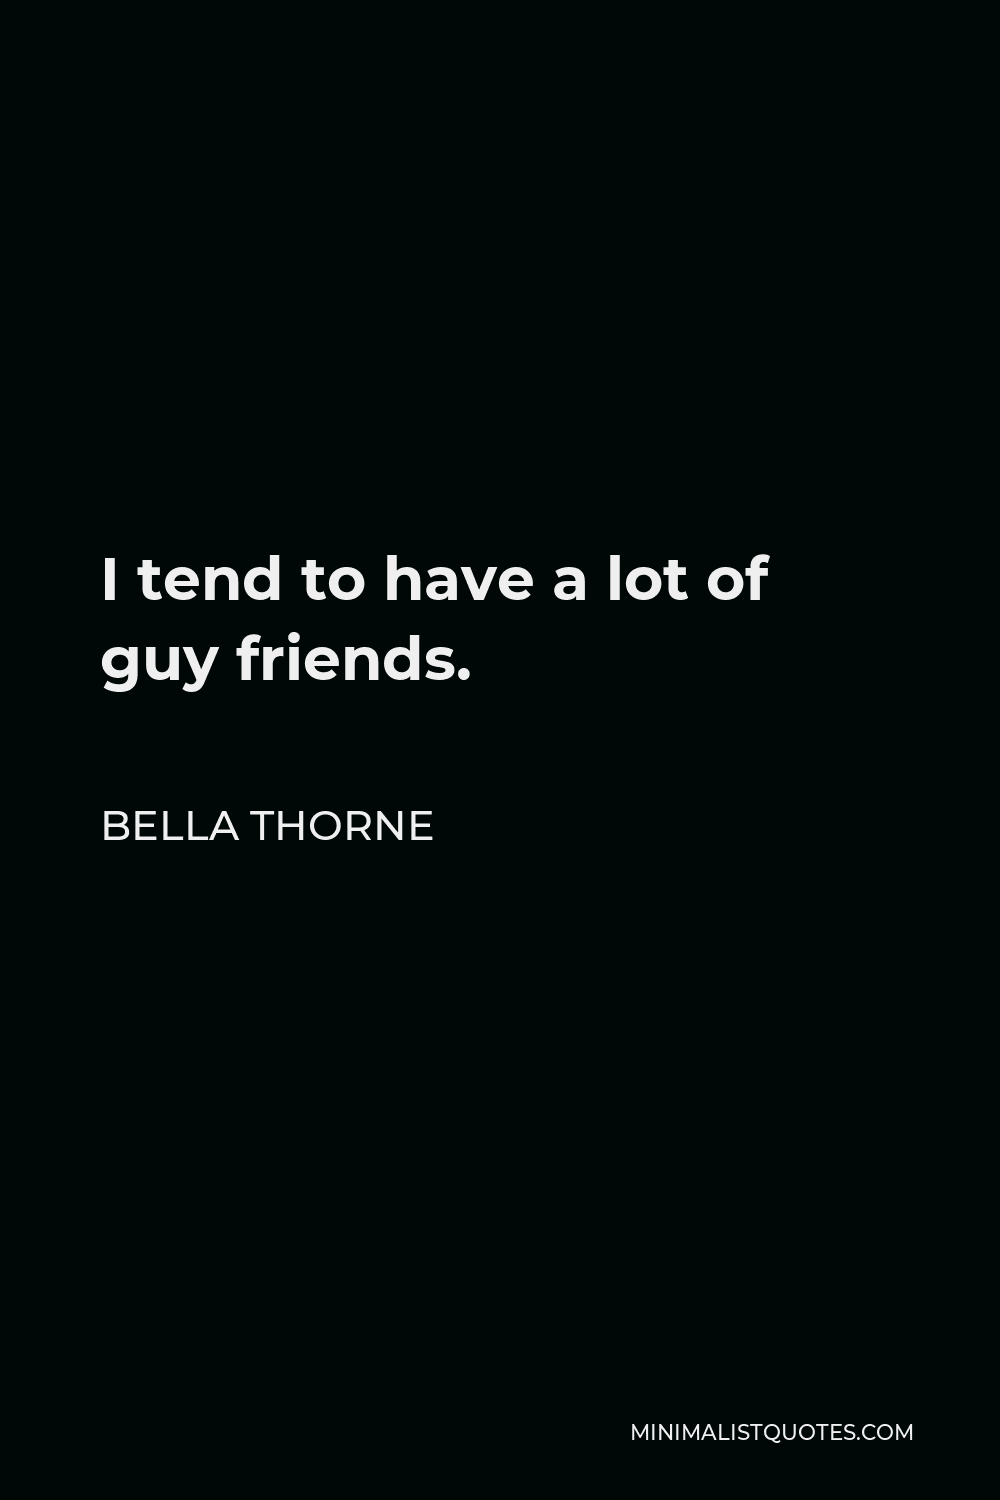 Bella Thorne Quote - I tend to have a lot of guy friends.